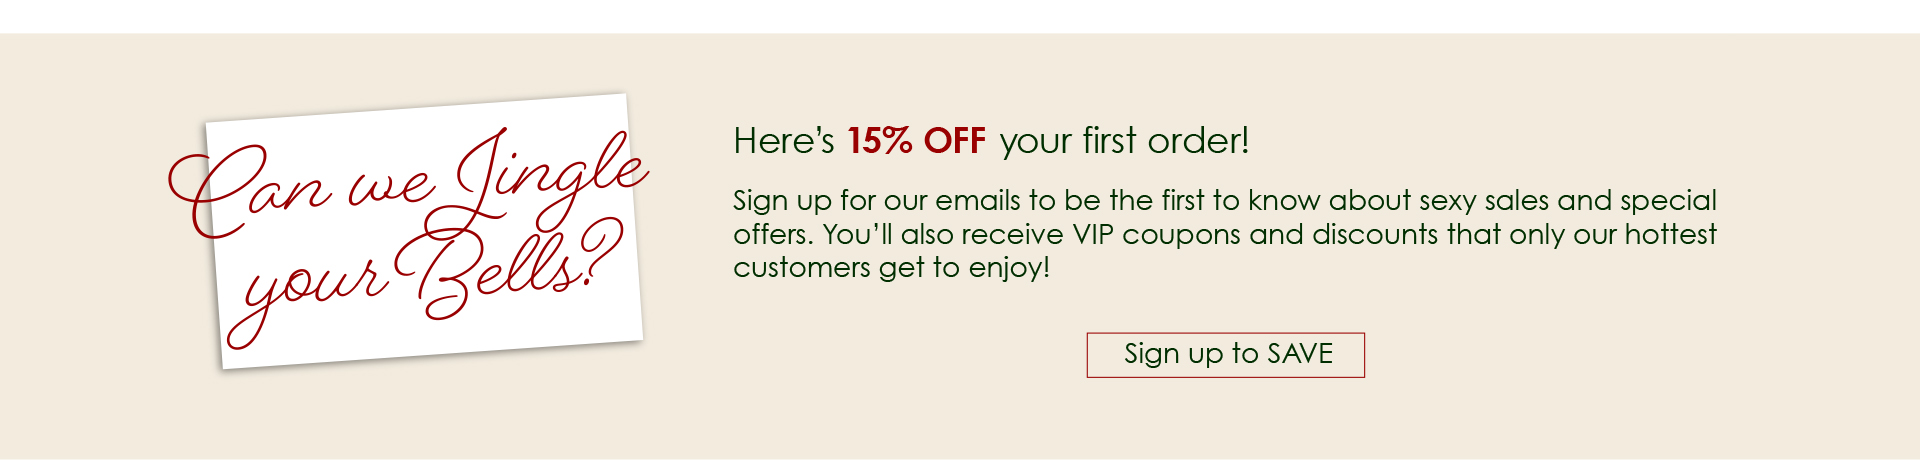 Let us Jingle Your Bells! - Here’s 15% OFF your first order! - Sign up for our emails to be the first to know about sexy sales and special offers. You’ll also receive VIP coupons and discounts that only our hottest customers get to enjoy! Sign Up to Save